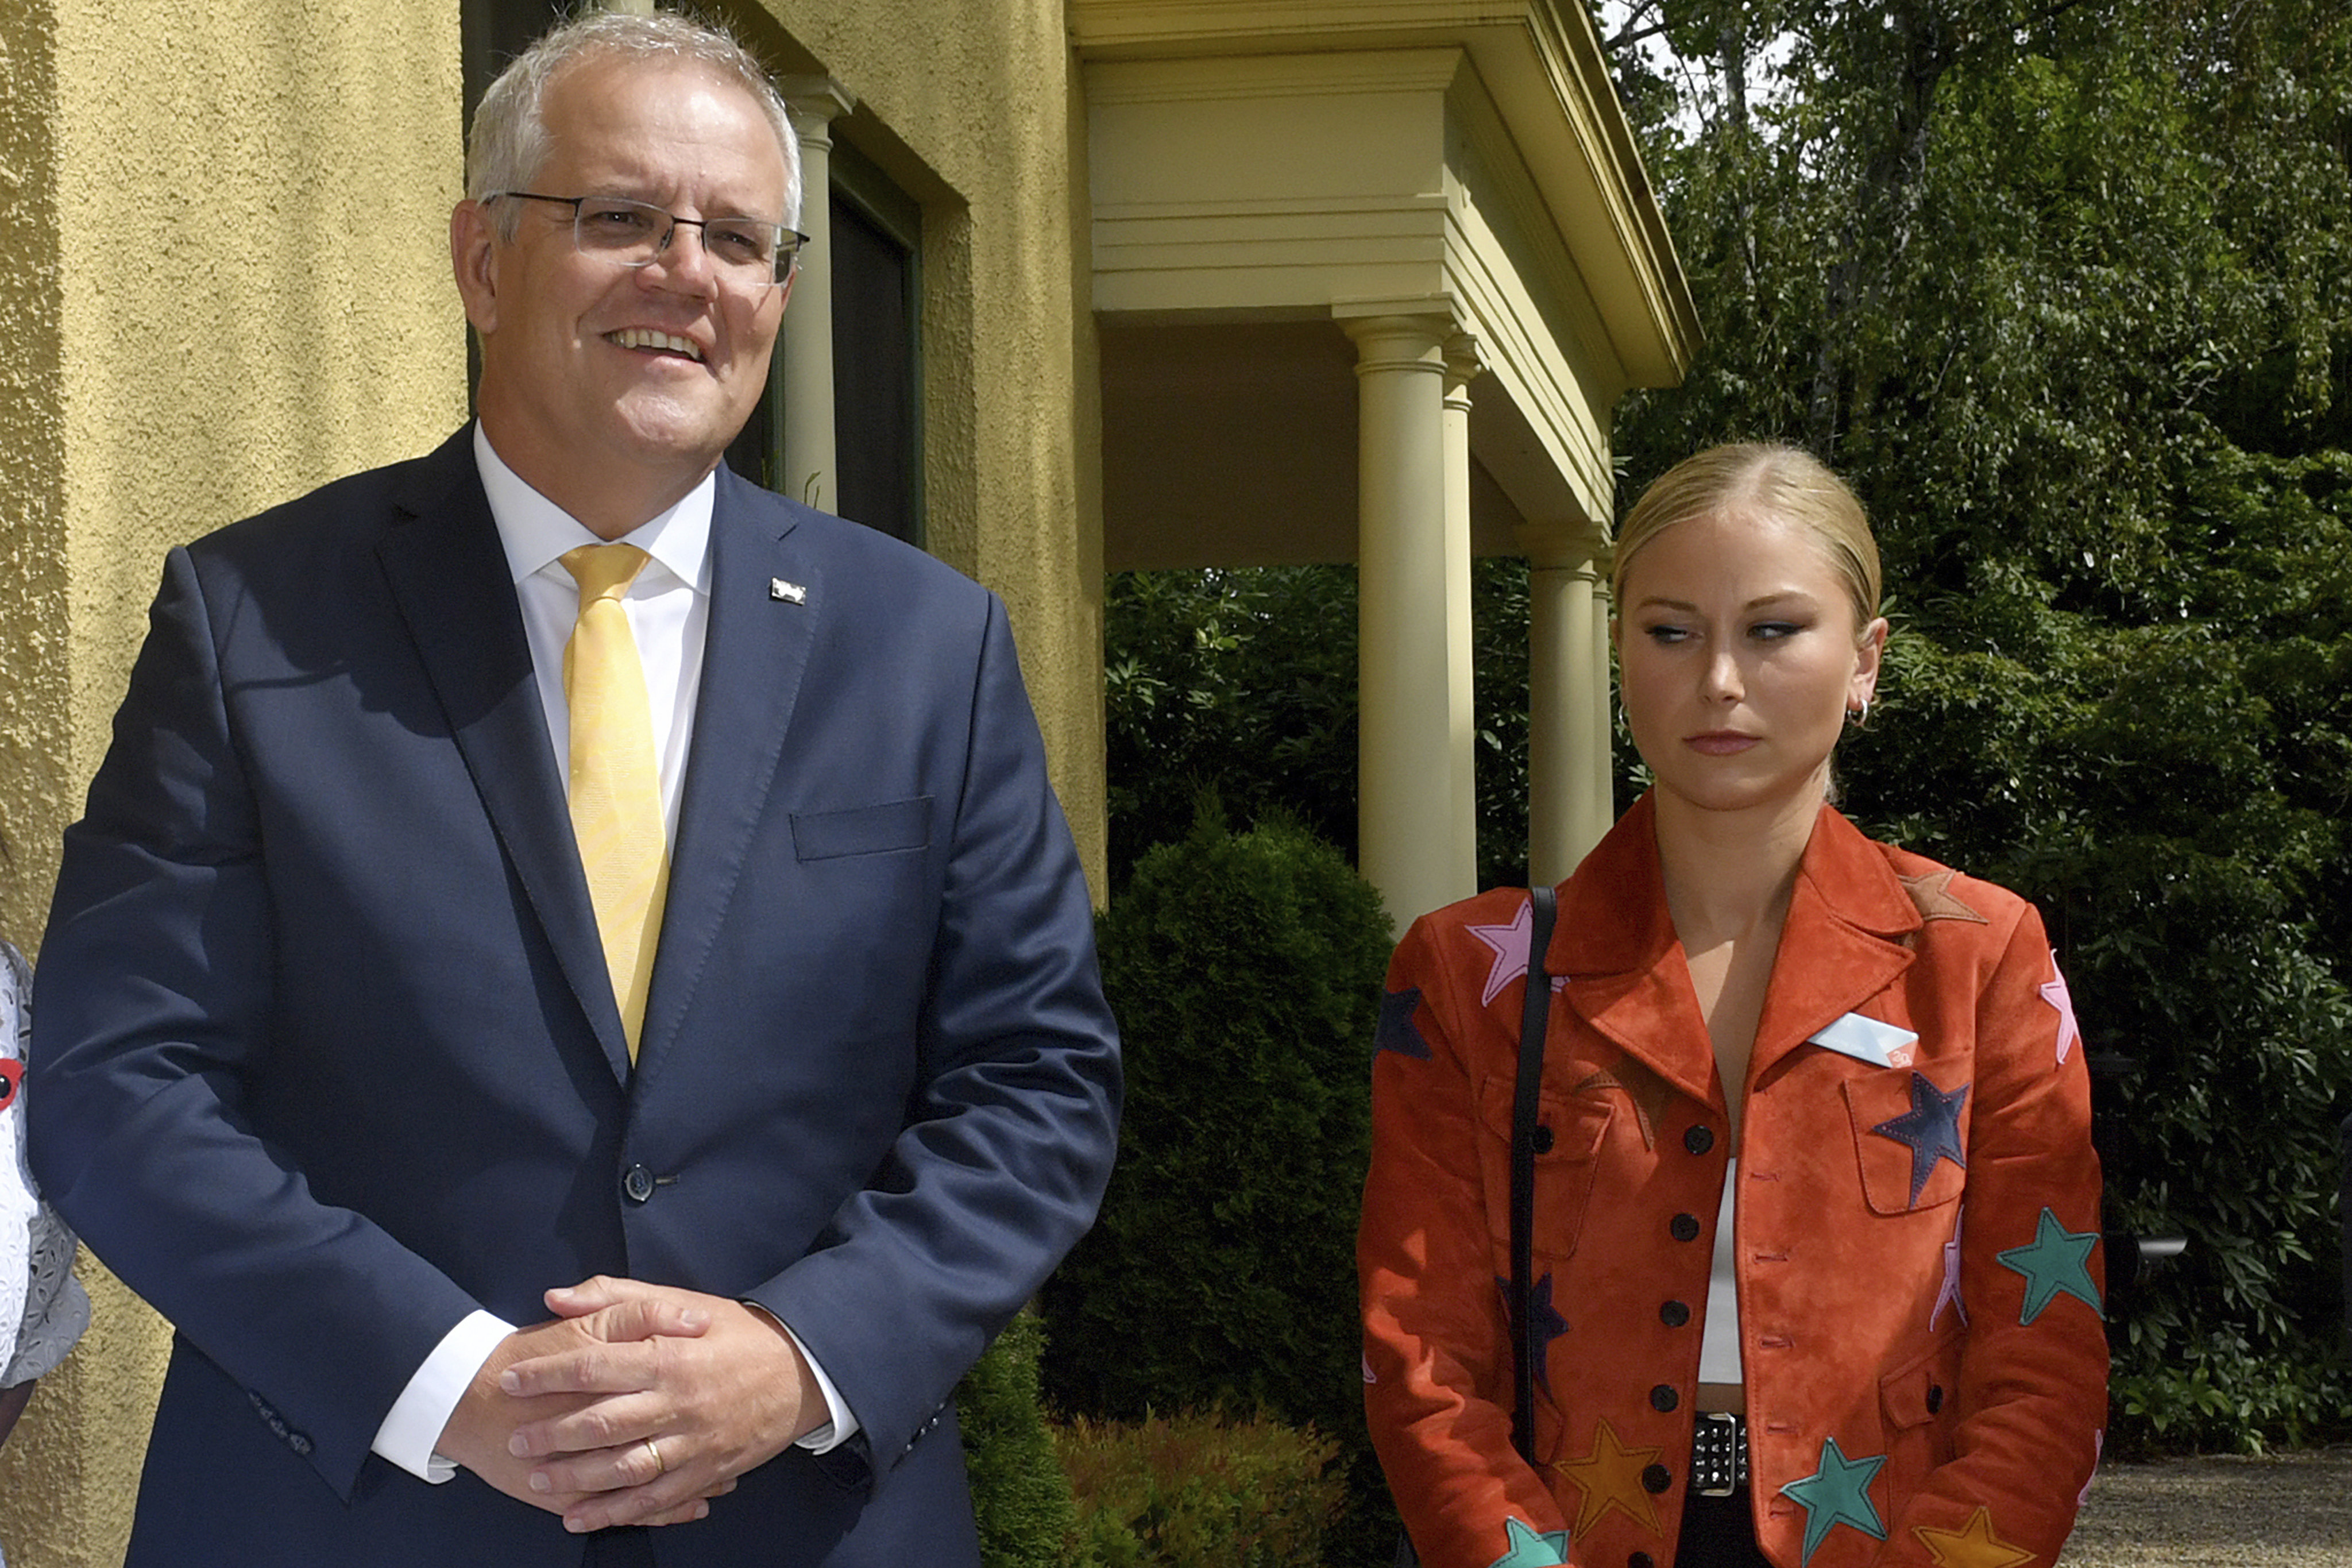 Prime Minister Scott Morrison and Grace Tame at the Australian of the Year Awards. Photo: AP